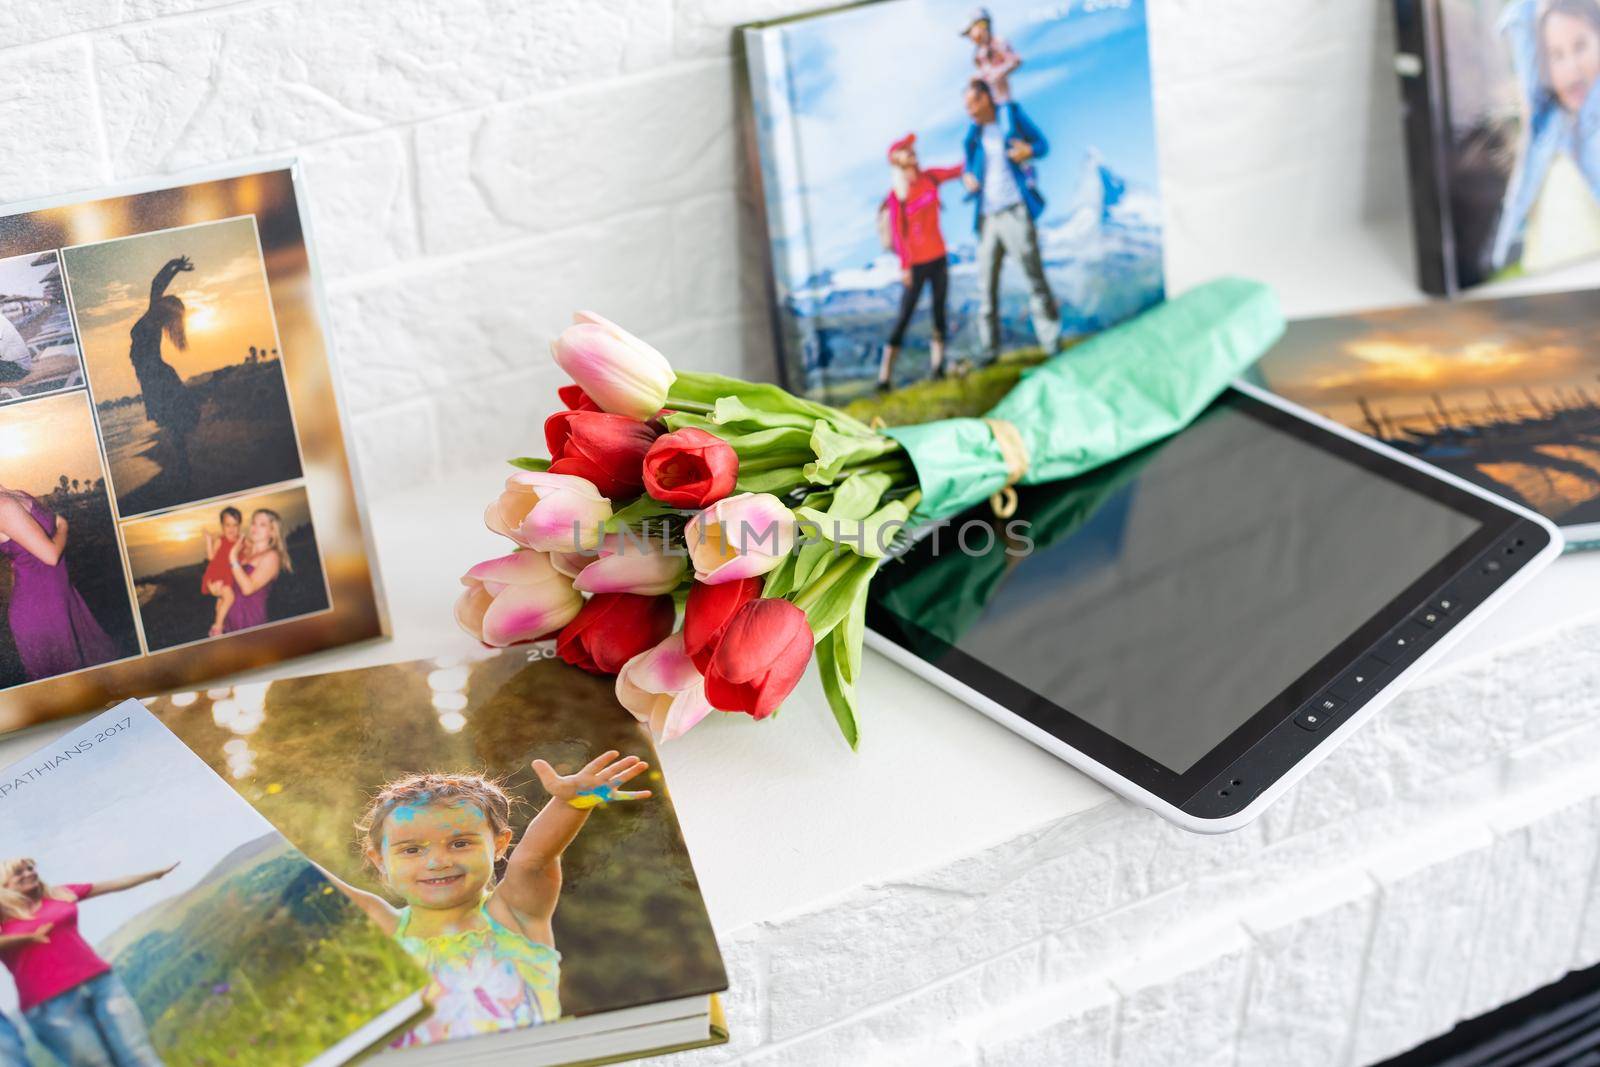 photo book and flowers tulips as a holiday gift lie on the shelf.